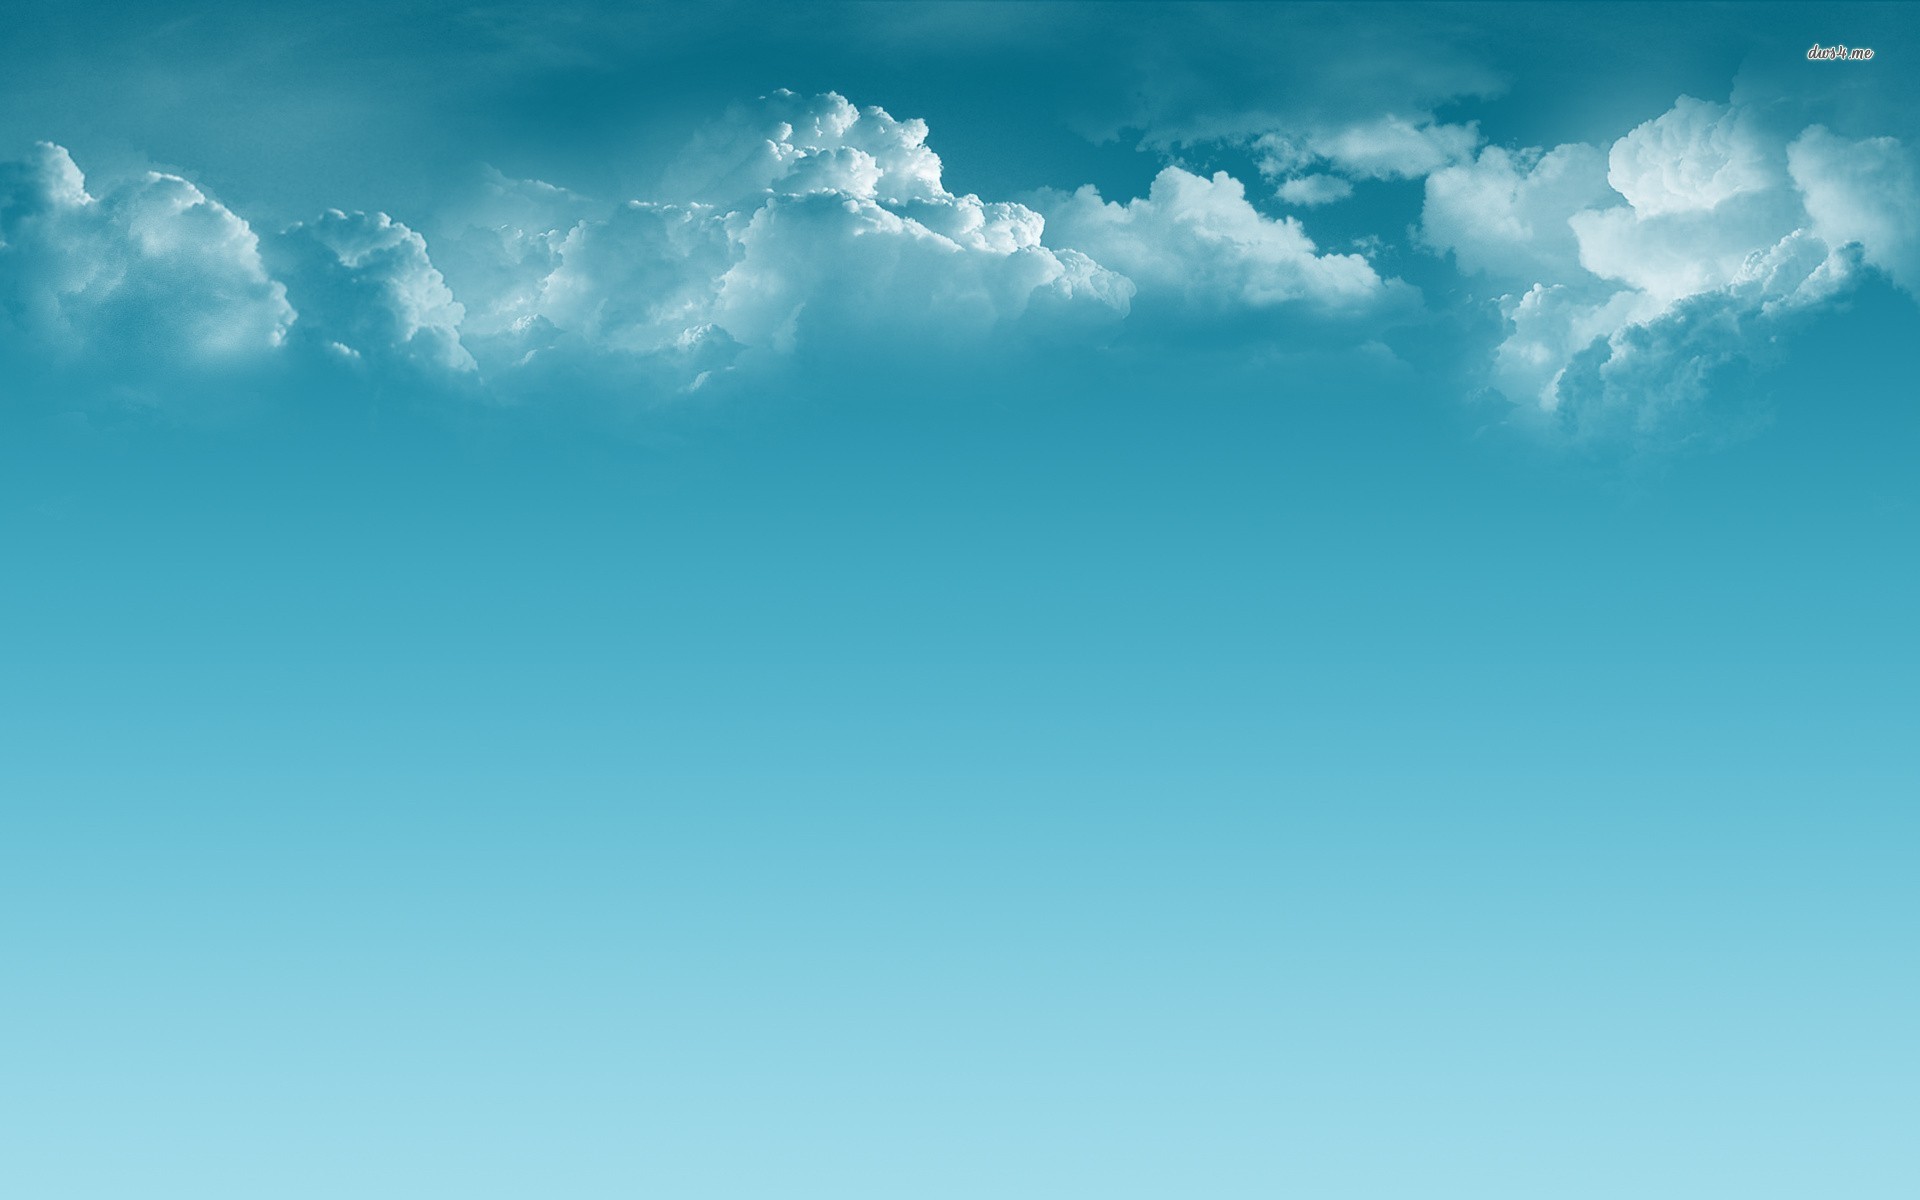 clouds-and-blue-sky-1920×1200-digital-art-wallpaper | First United ...